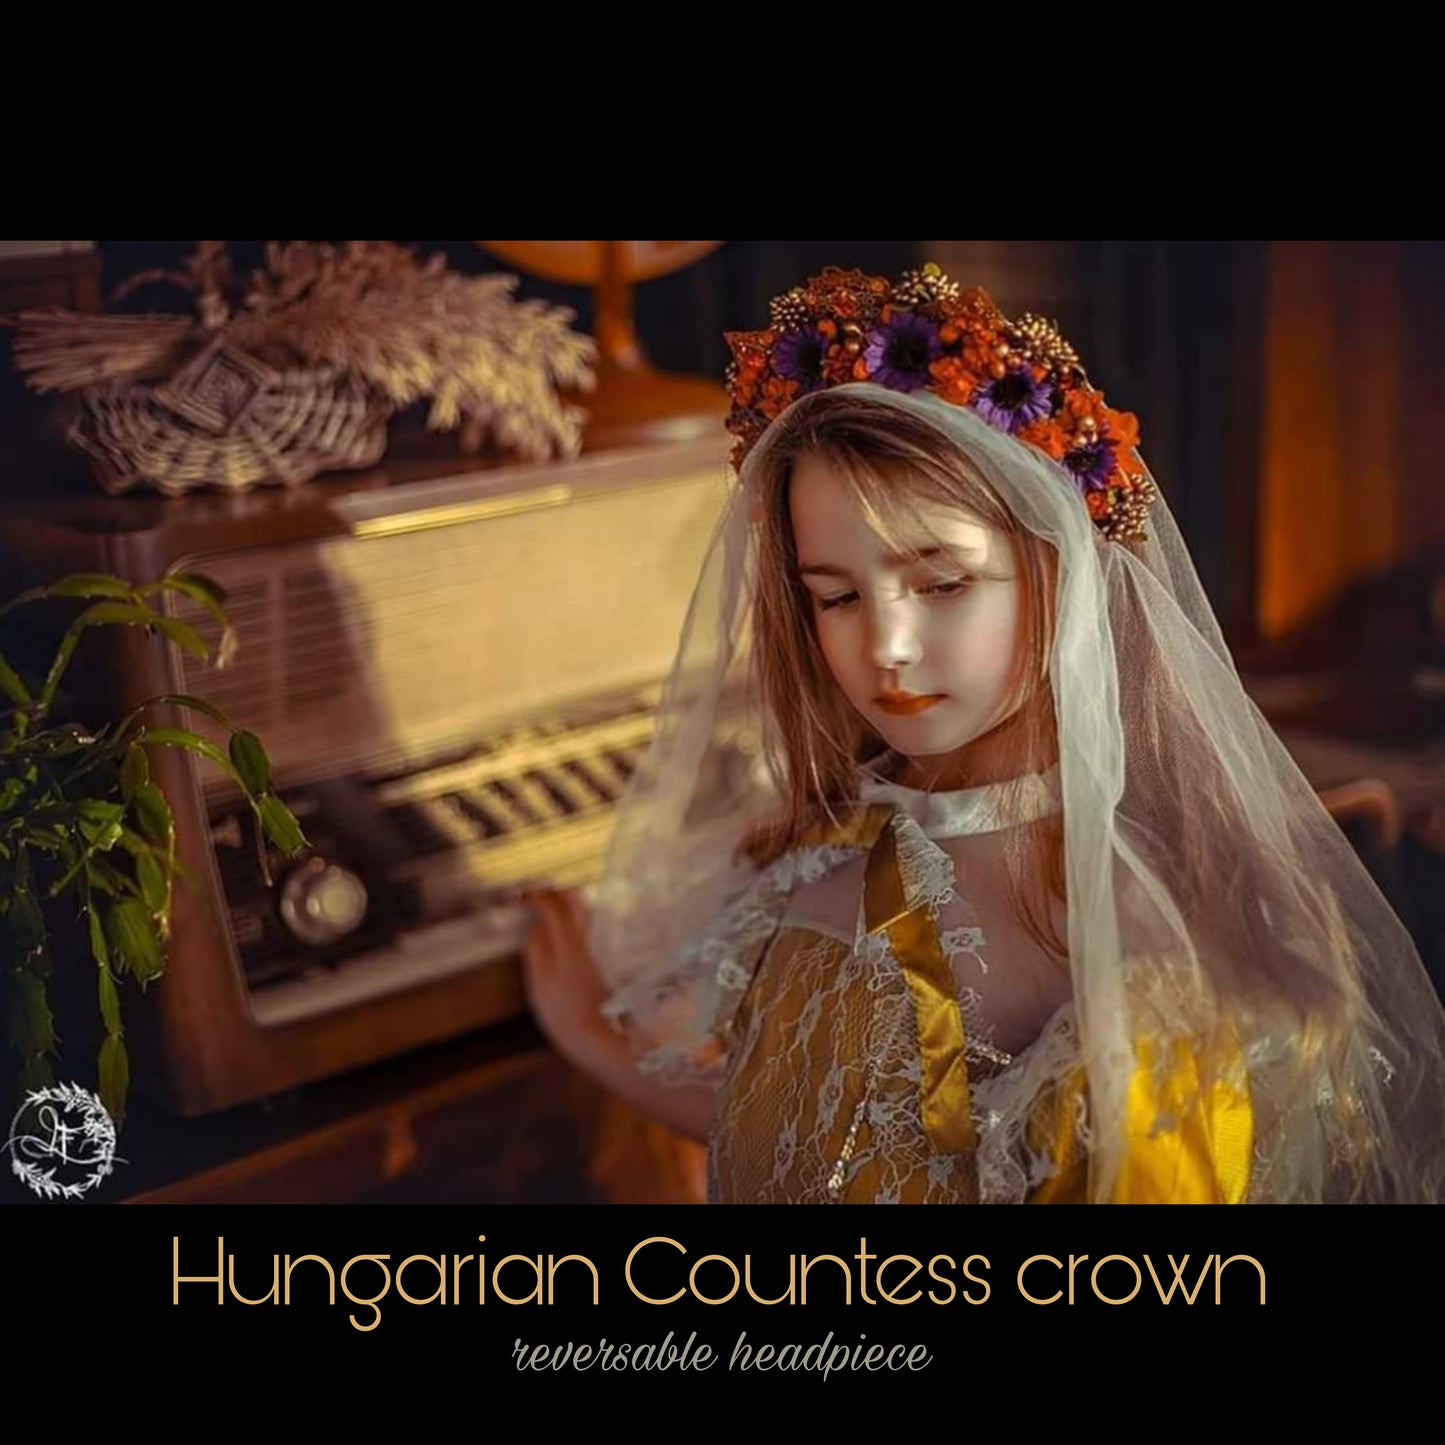 The Hungarian Countess flower crown, reversable headpiece